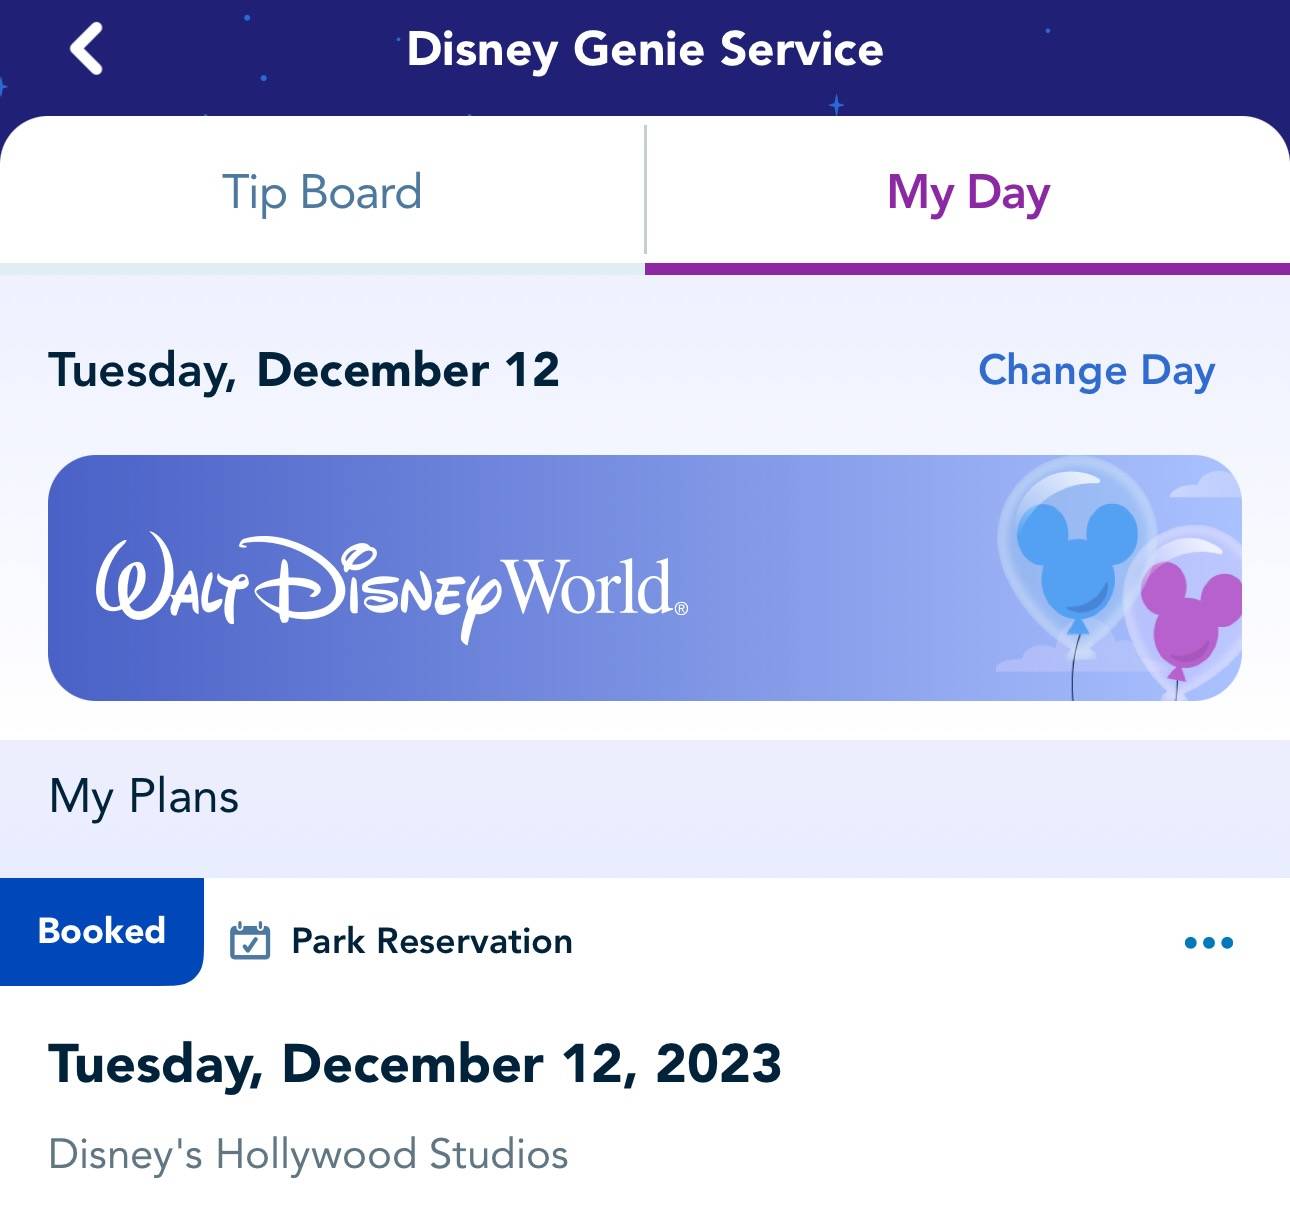 Disney Park Pass: What to know about new park reservation tool